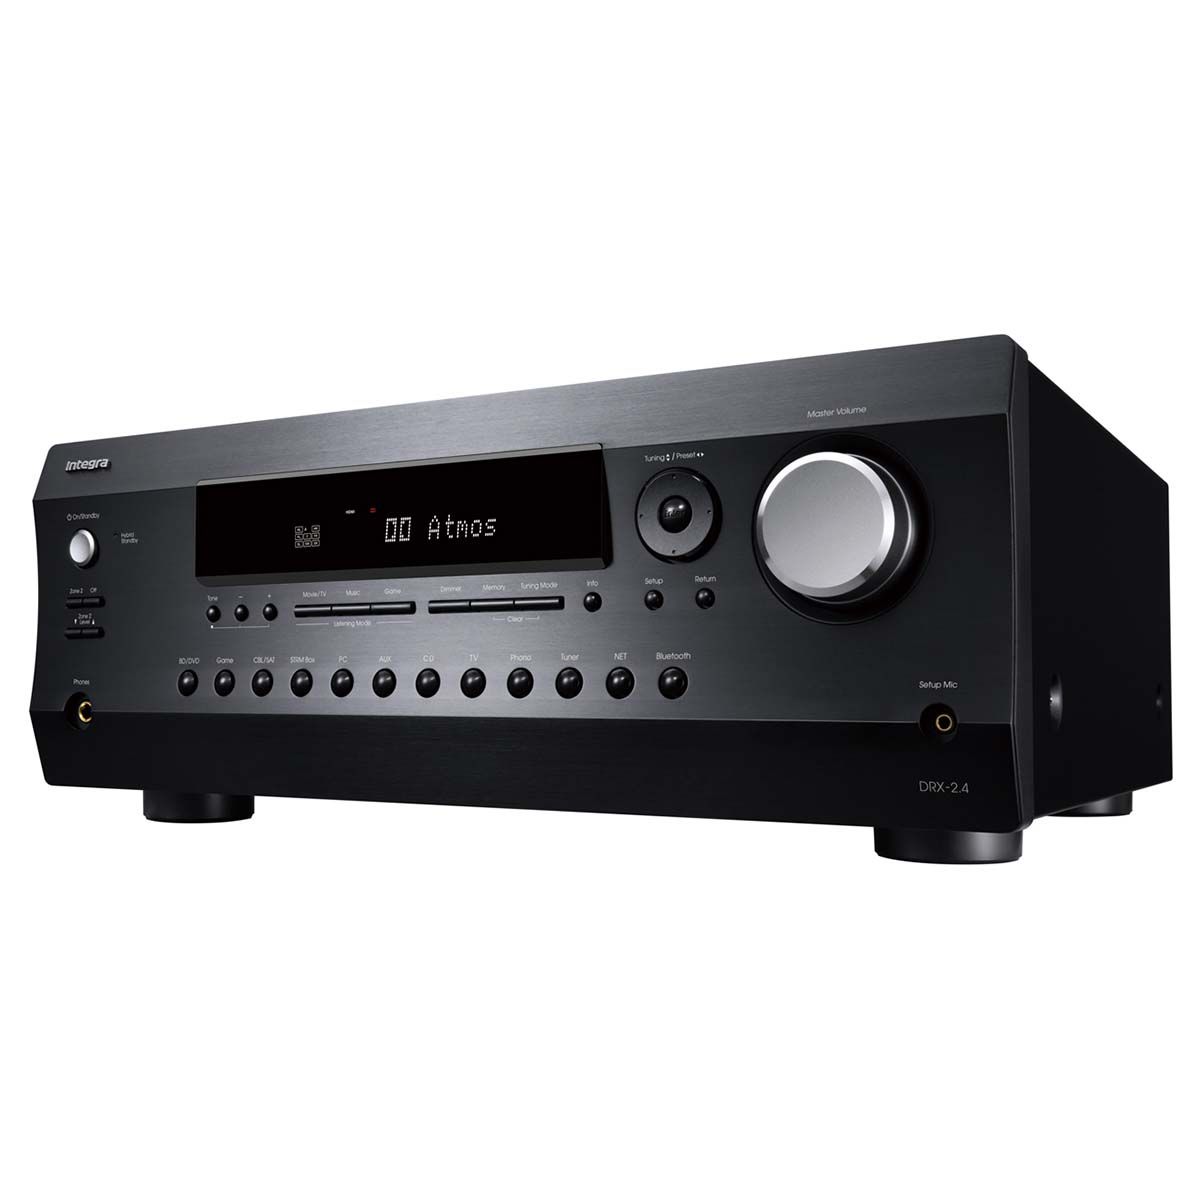 Integra DRX 2.4 Home Theater Receiver, front left angle